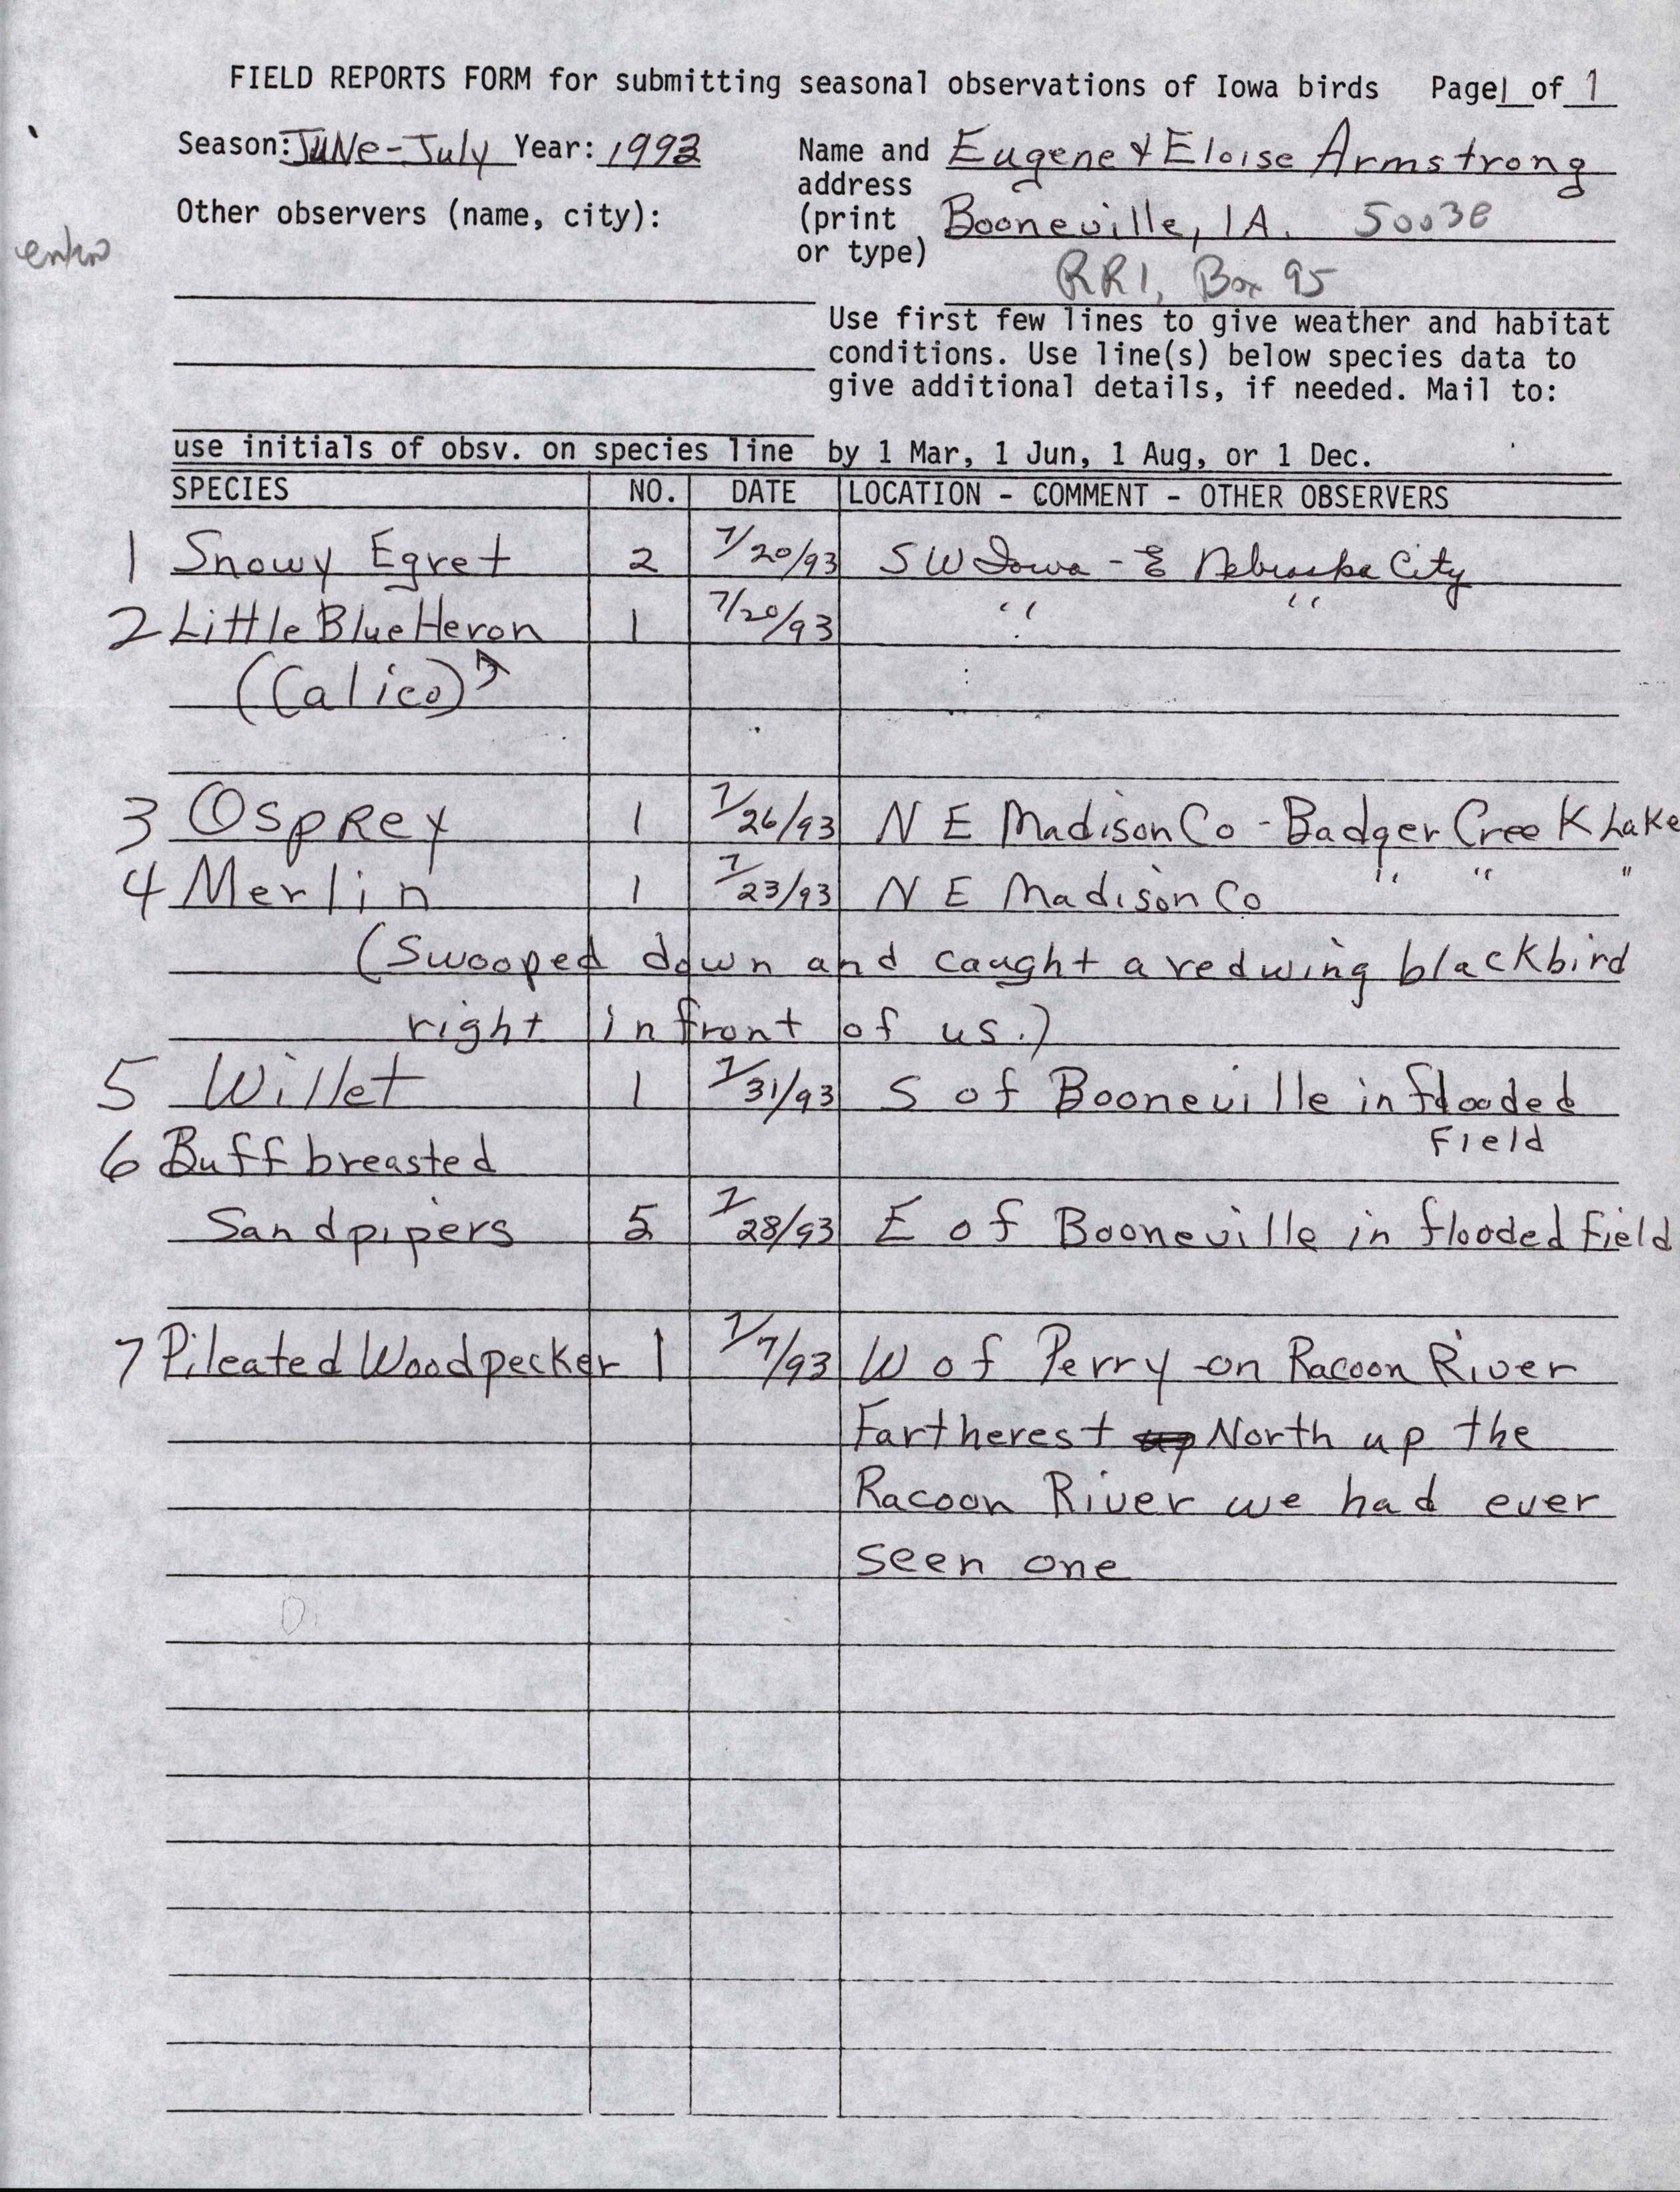 Field reports form for submitting seasonal observations of Iowa birds, Eugene Armstrong and Eloise Armstrong, summer 1993